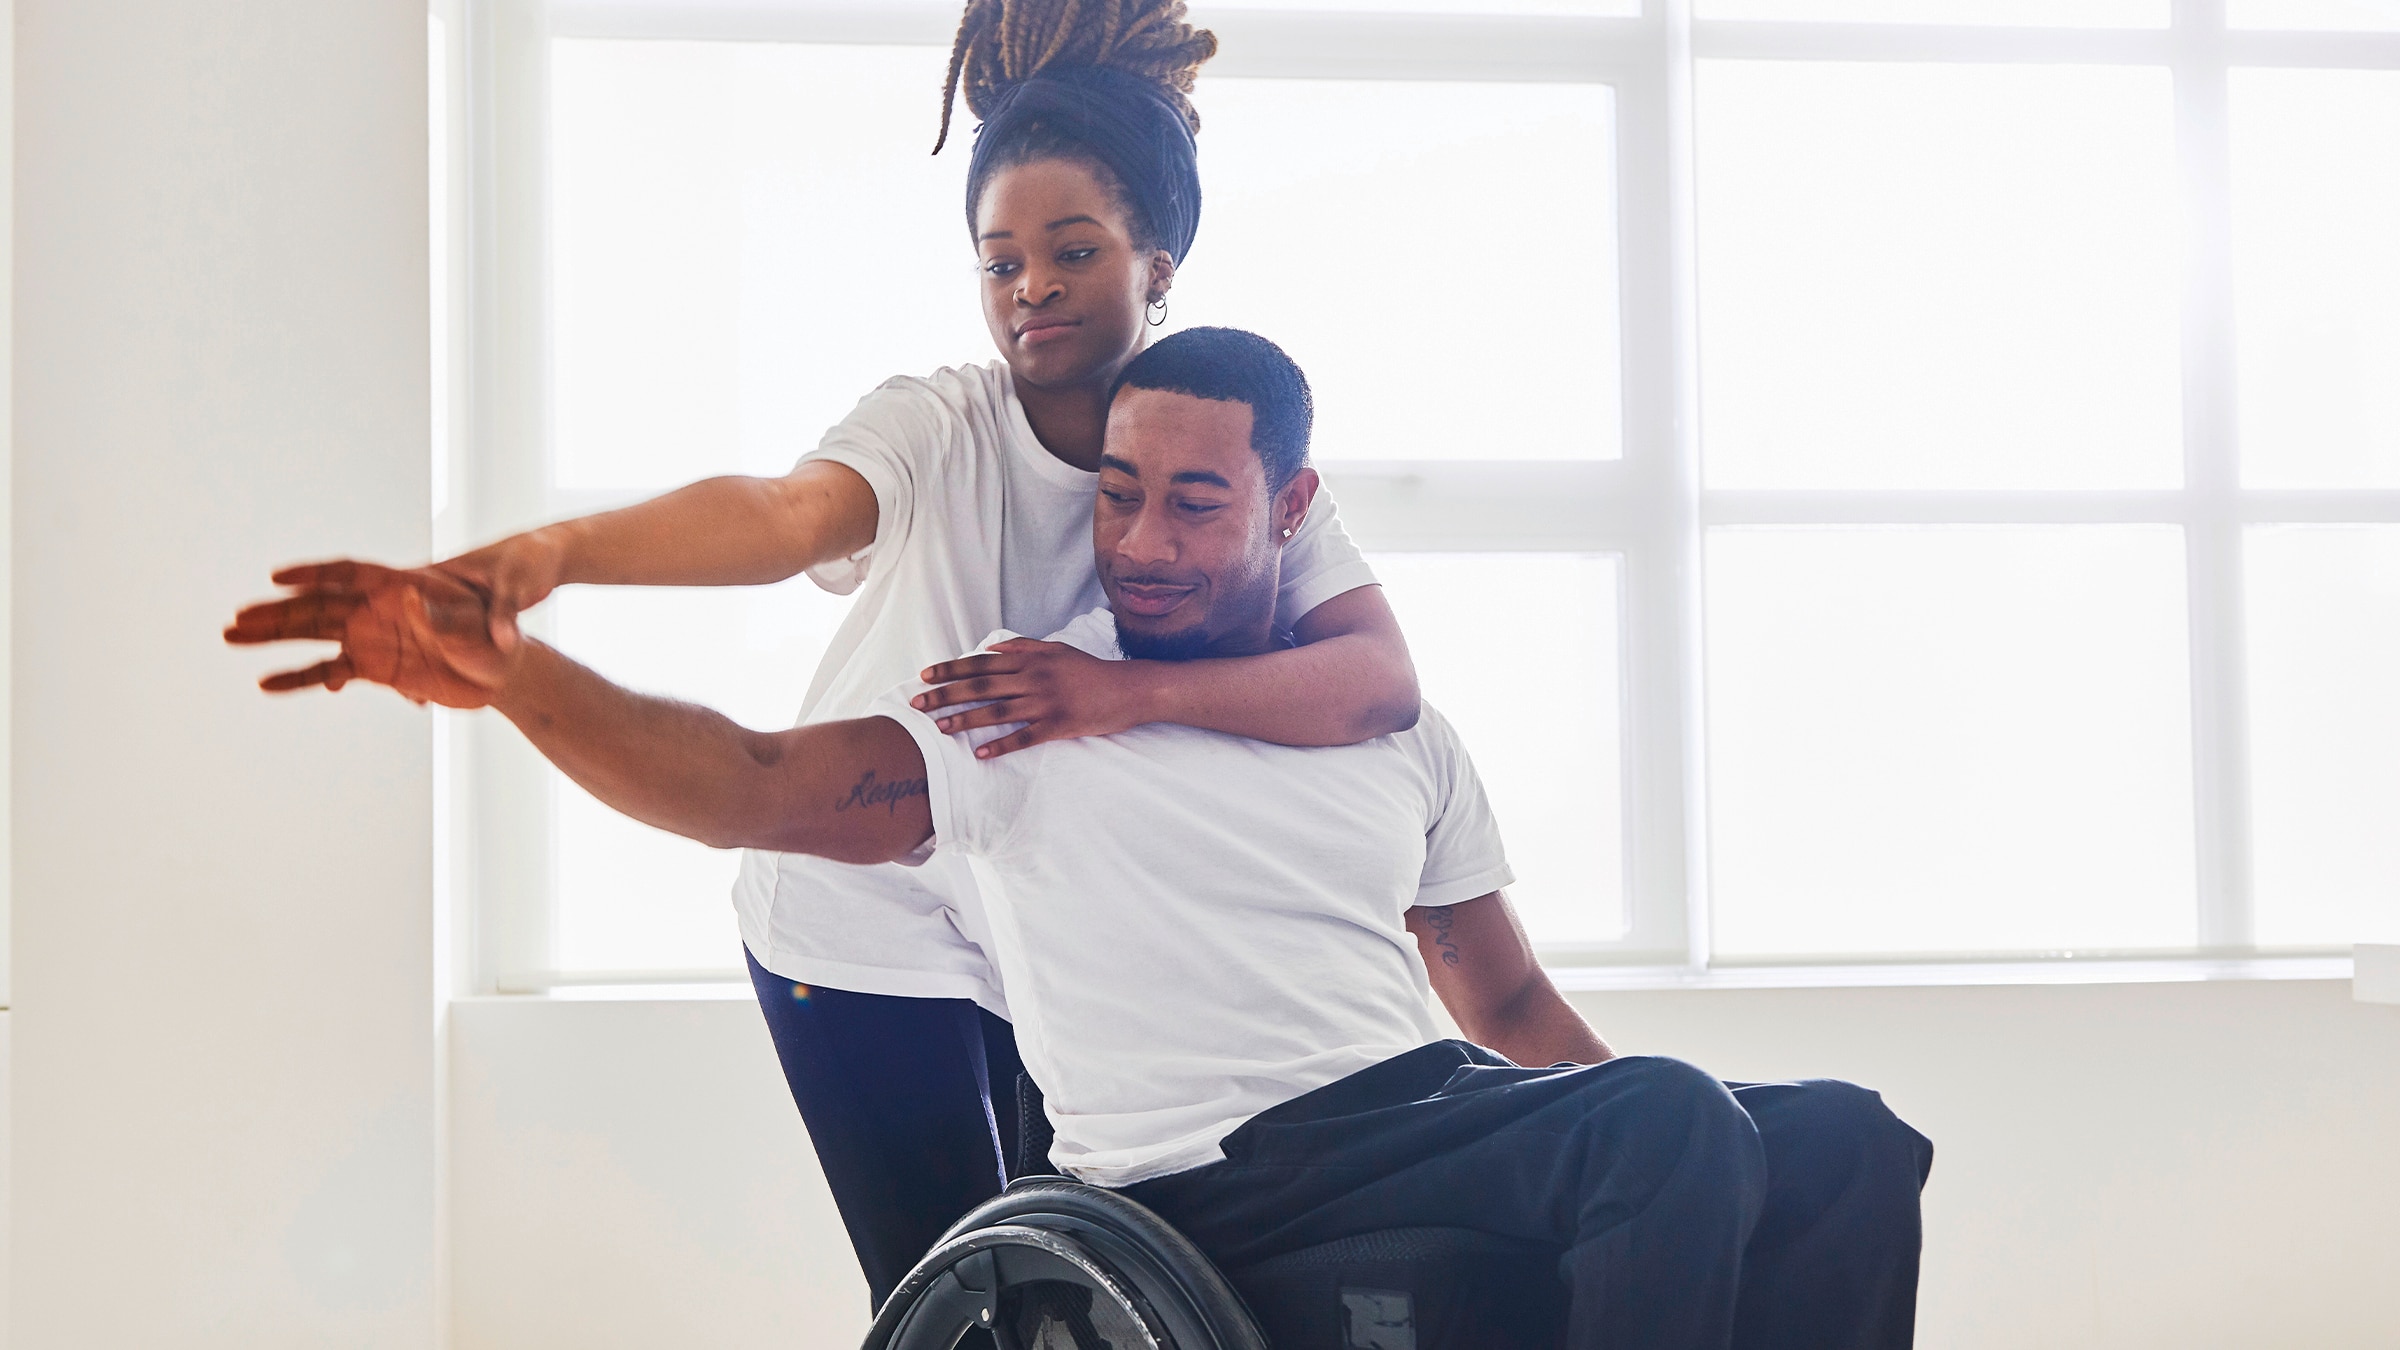 A woman helping a man in a wheelchair stretch his arm indoors.